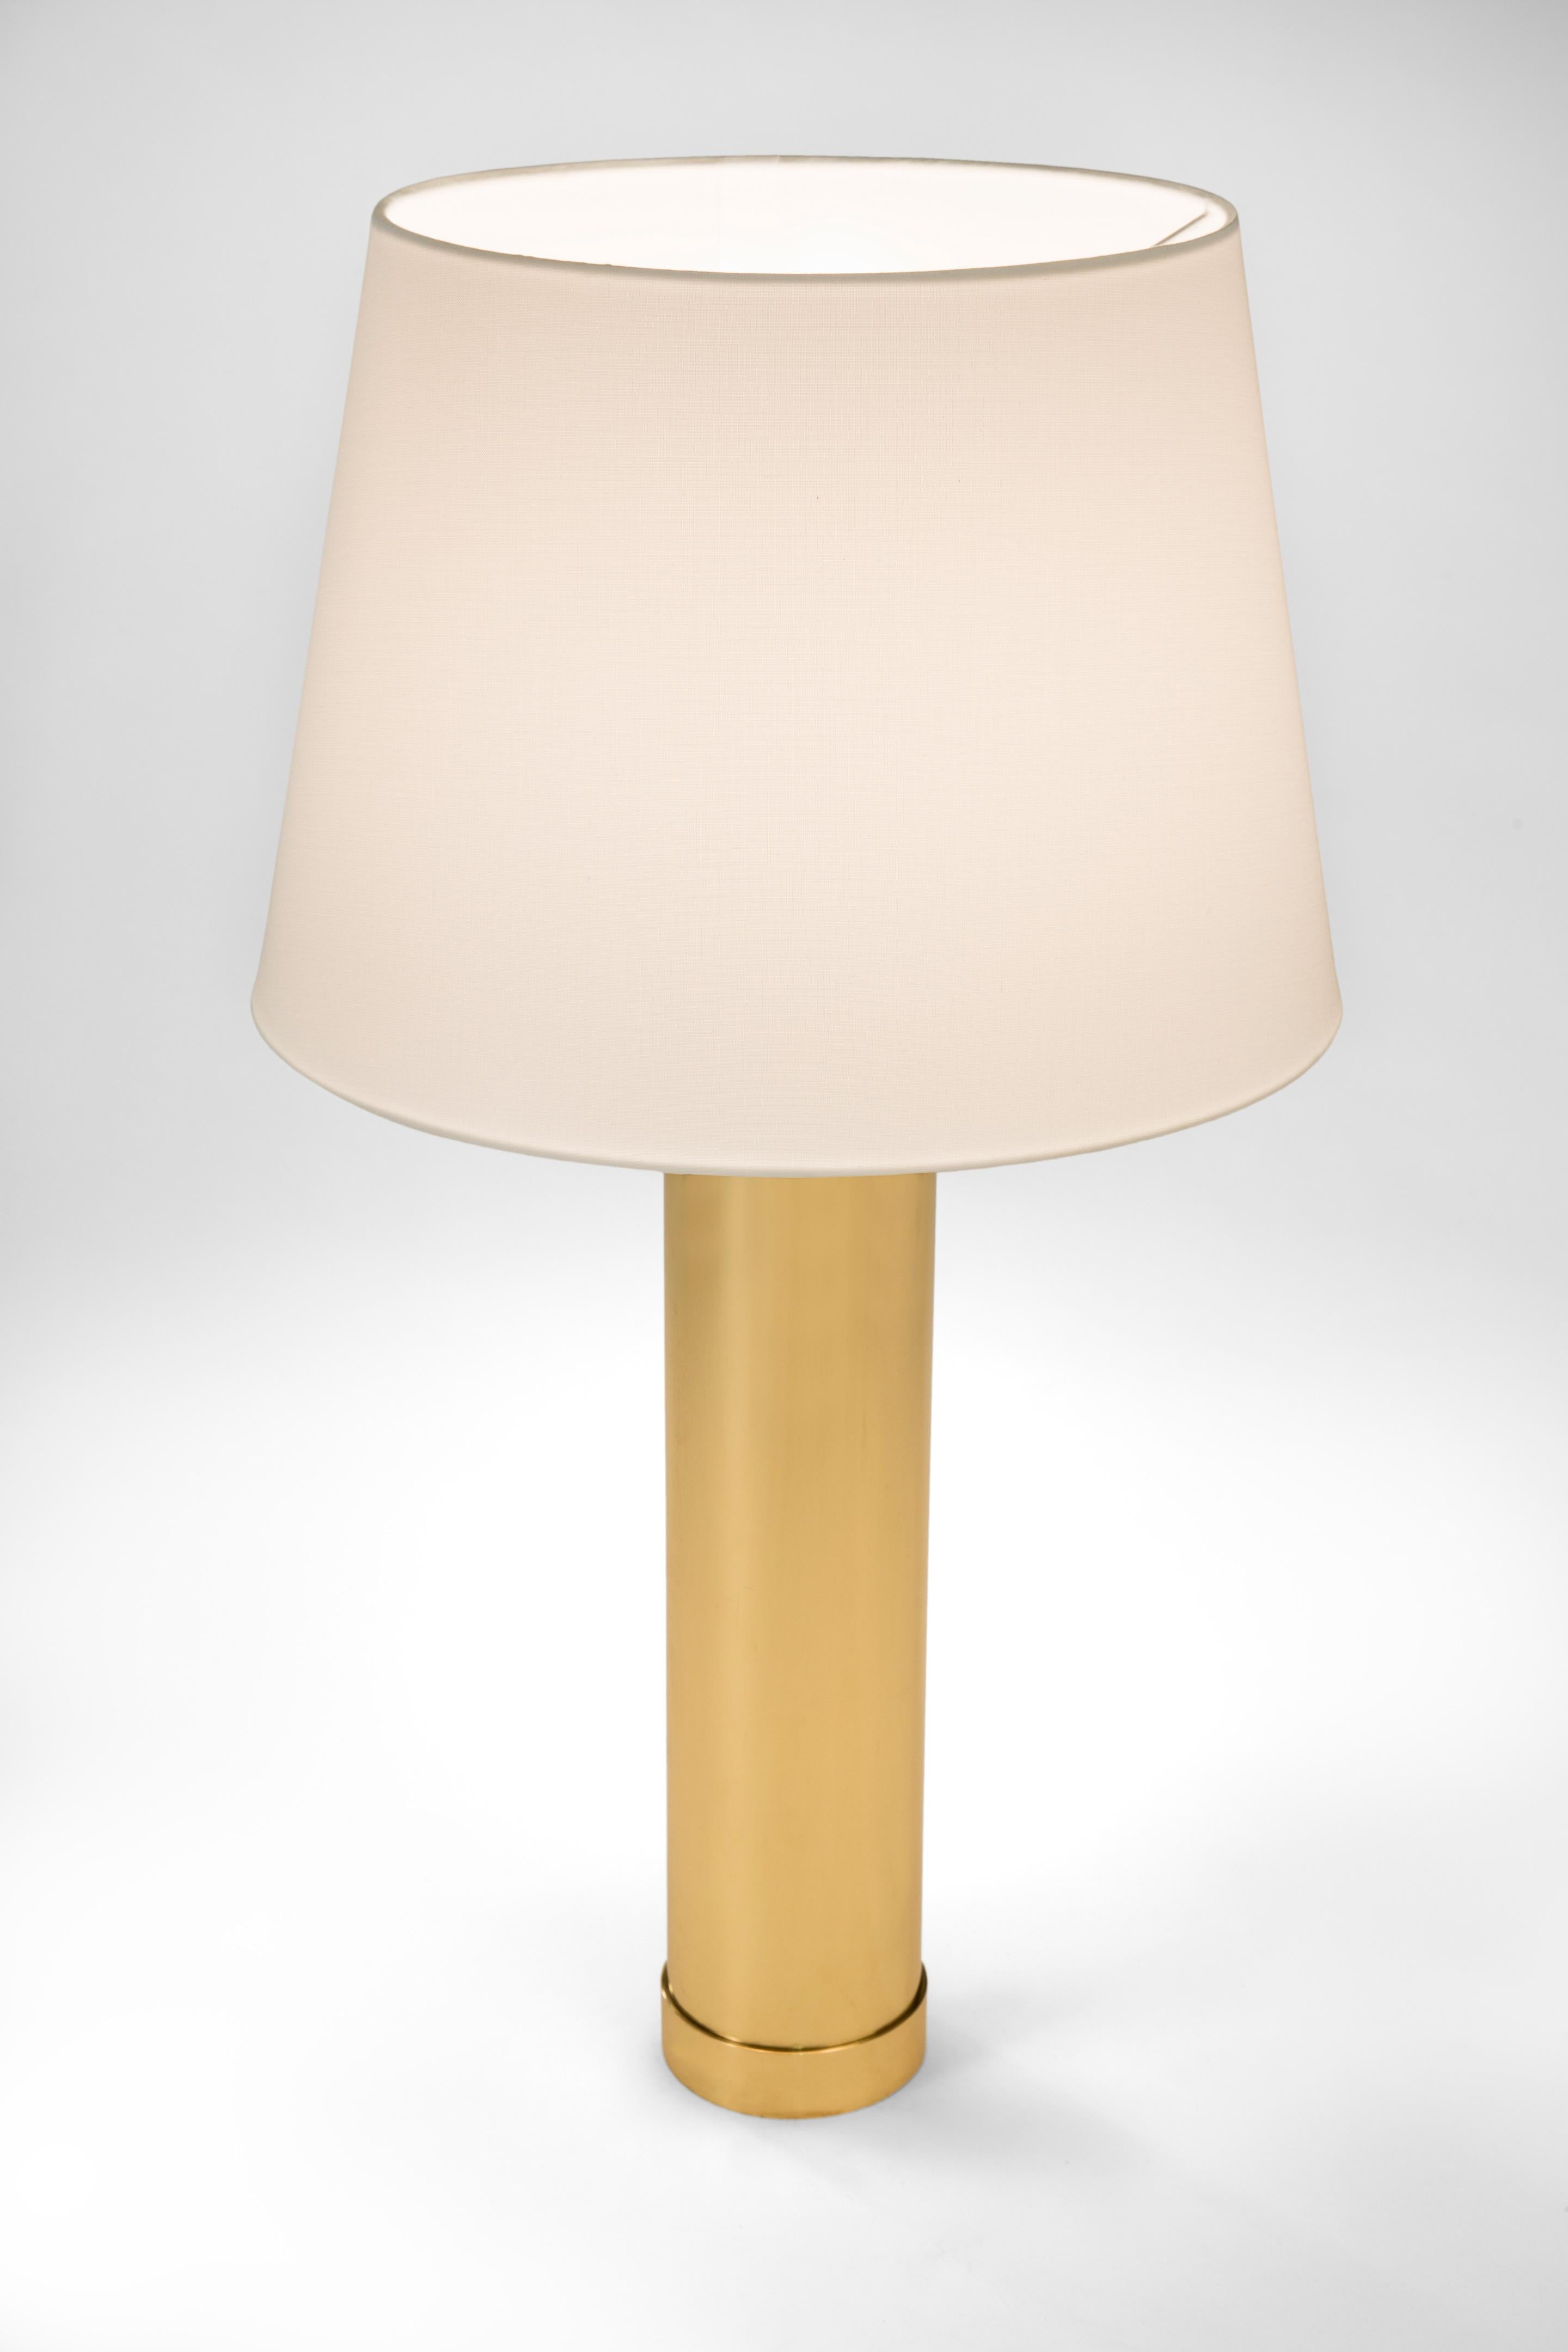 Polished Pair of Swedish Mid-Century Modern Brass Lamps by Bergboms